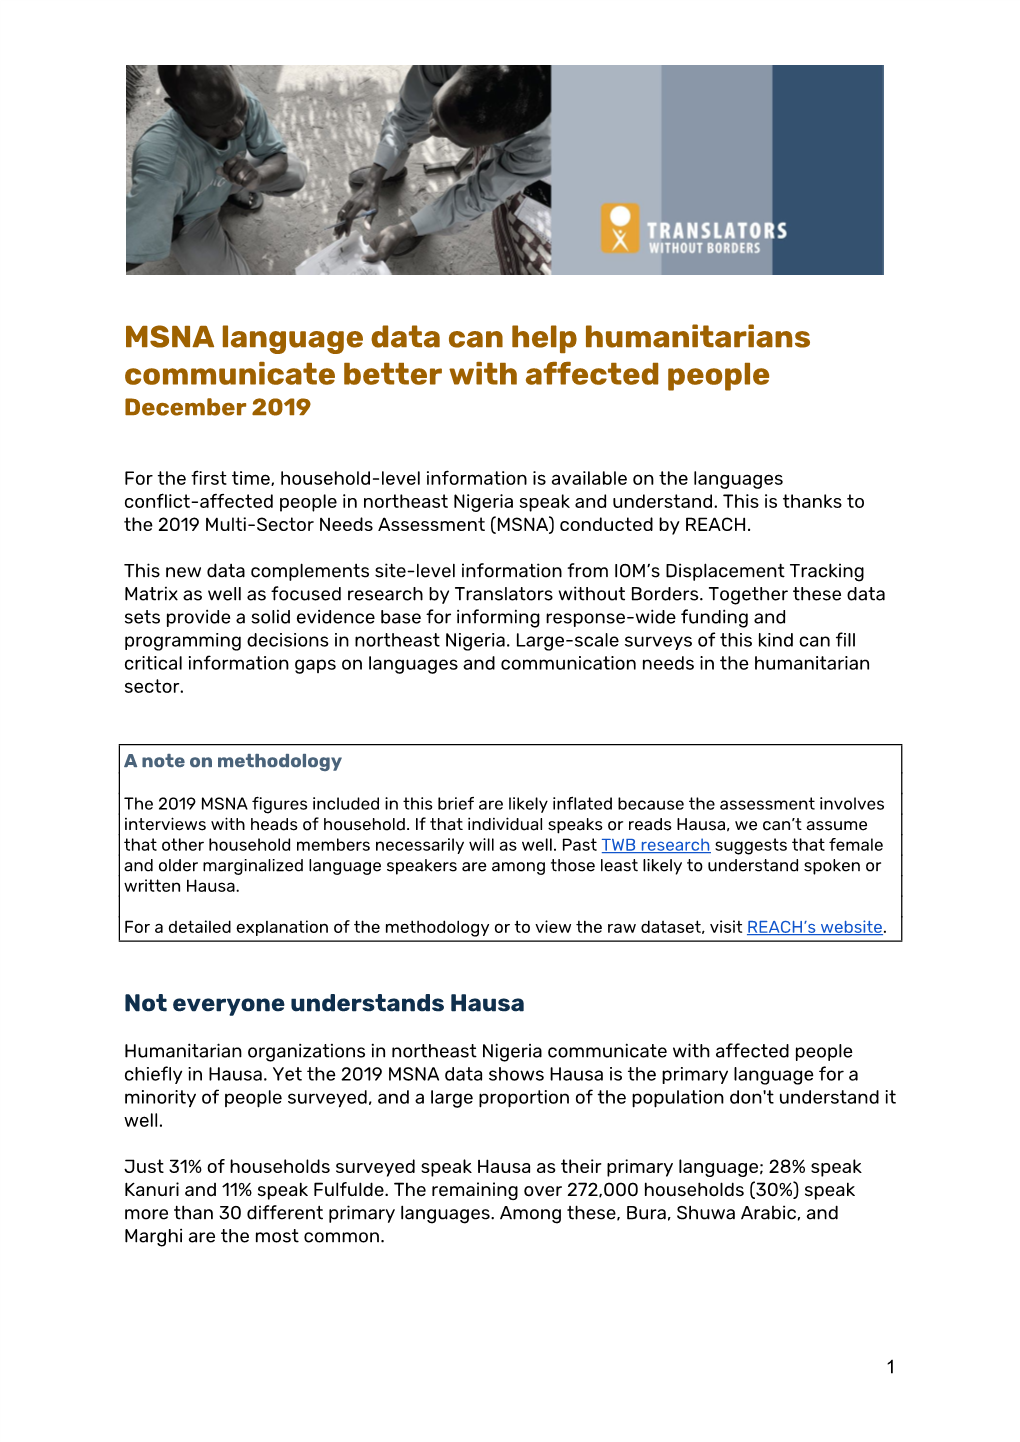 MSNA Language Data Can Help Humanitarians Communicate Better with Affected People December 2019